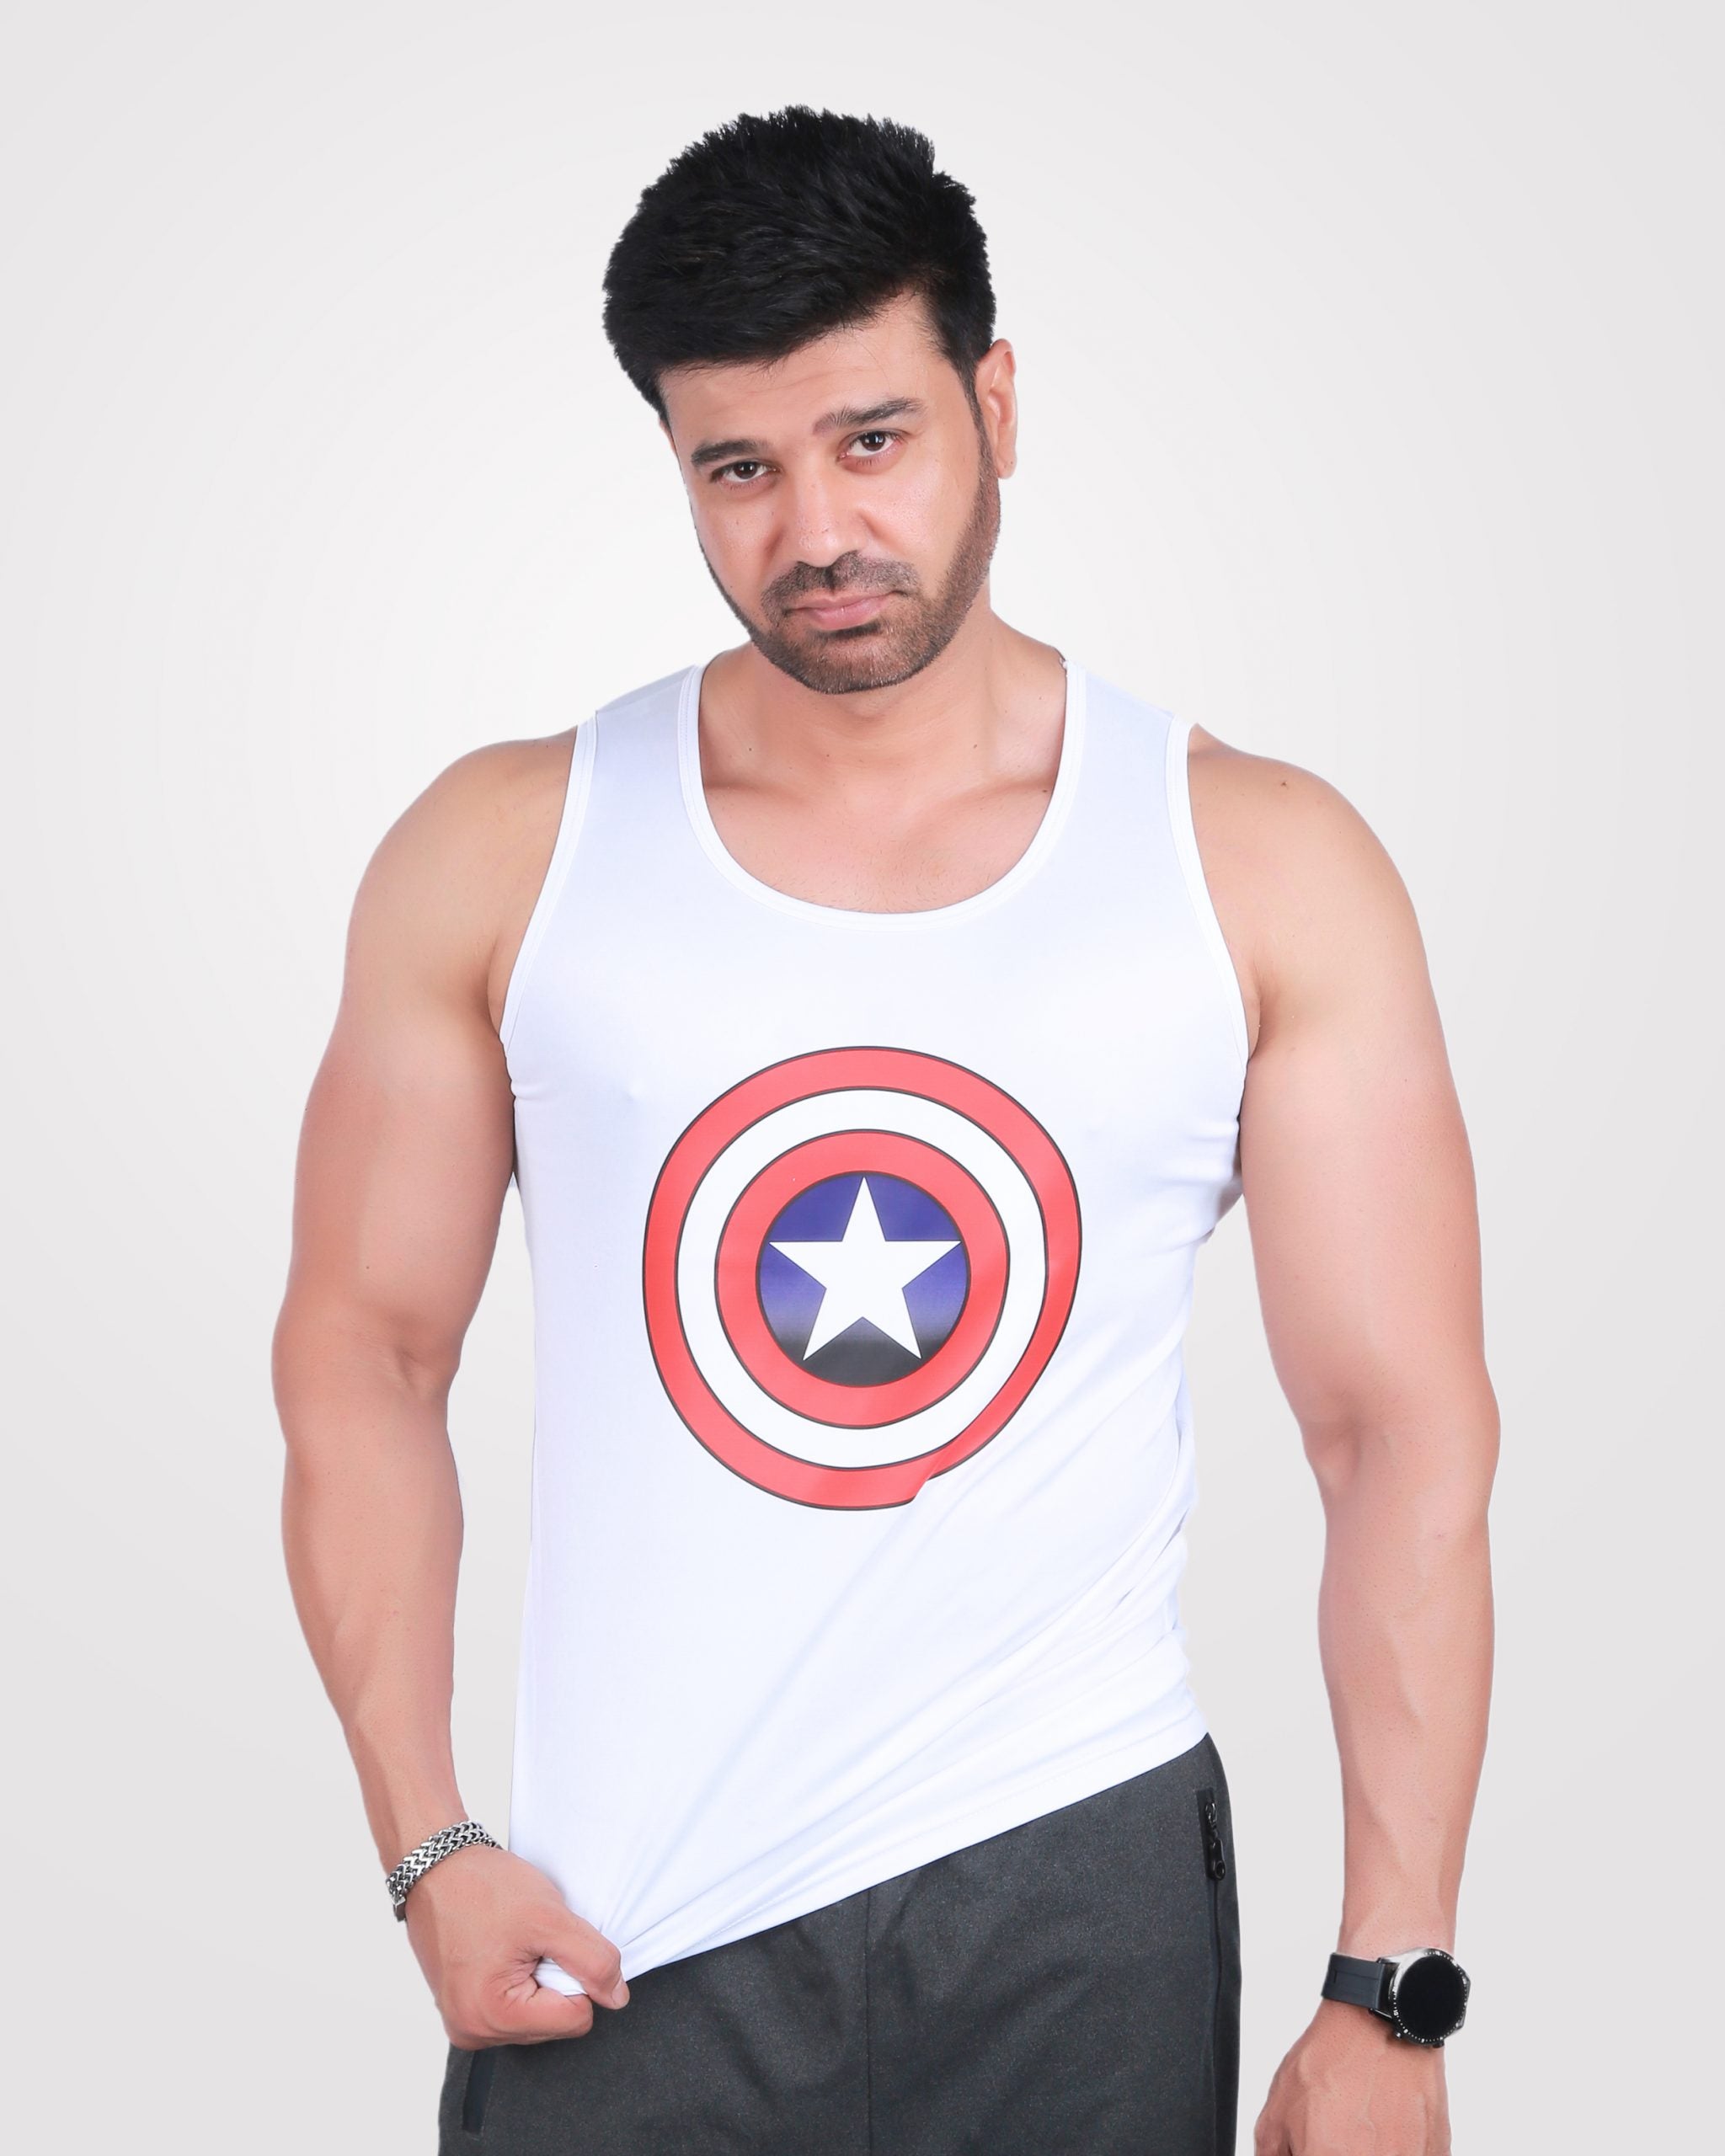 Mens Tank Top Cpt. White – Outgears Fitness